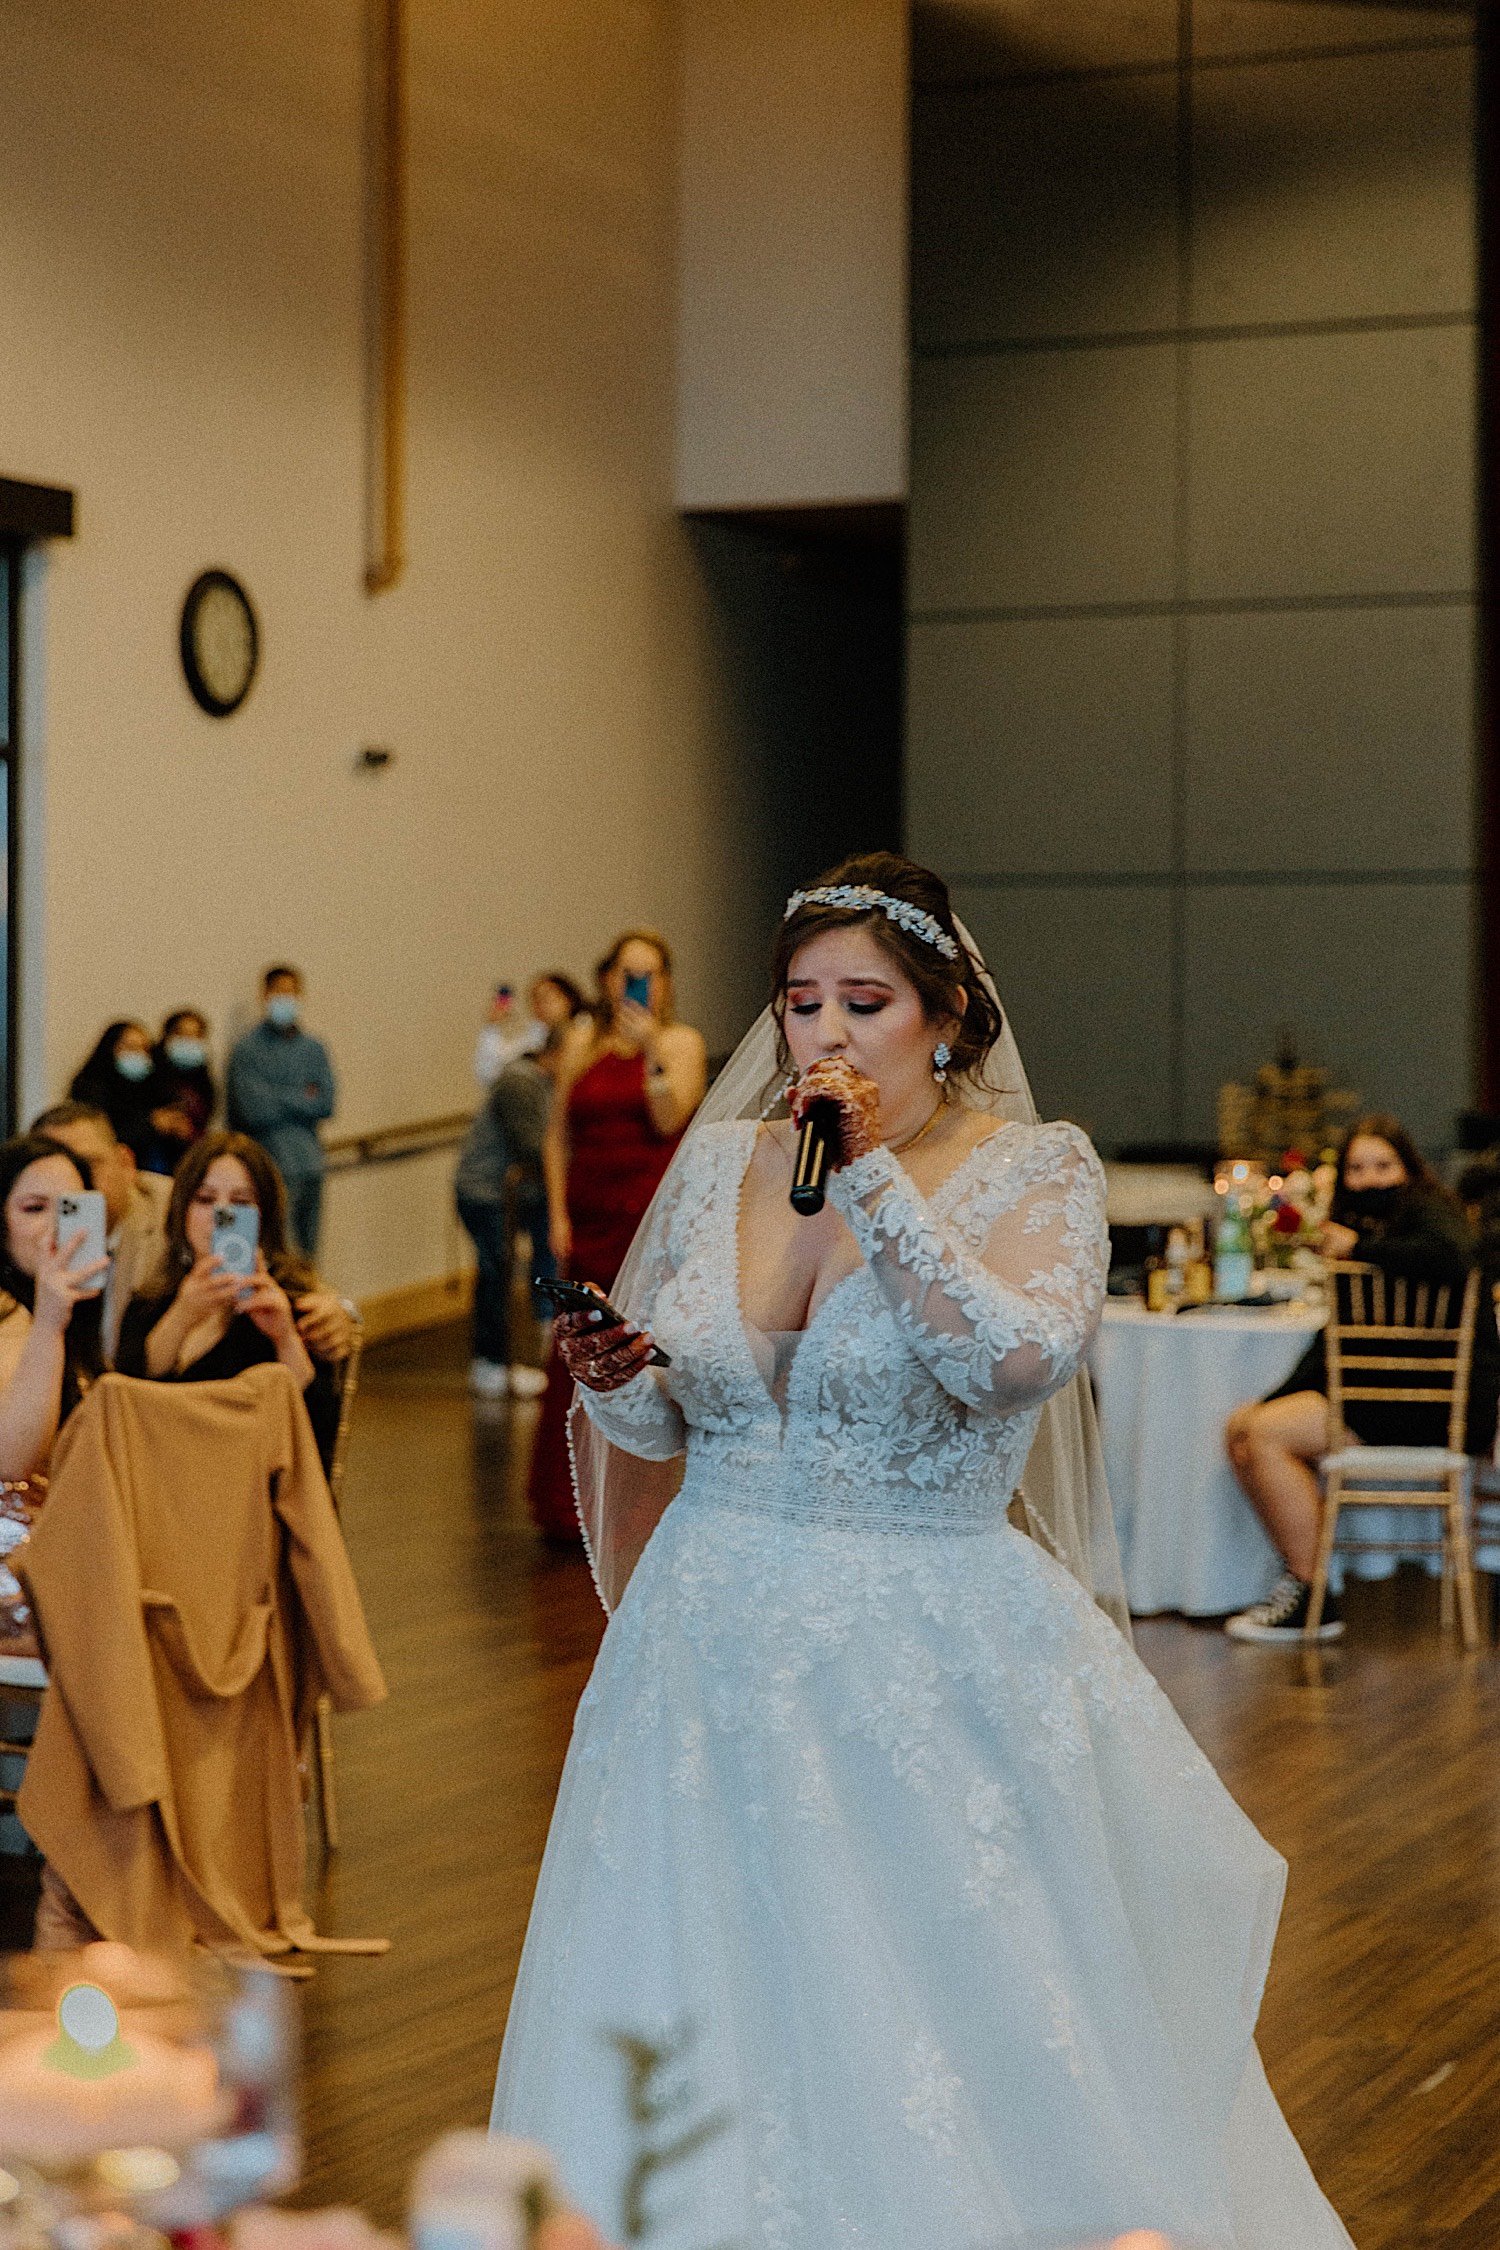 Bride sings to groom while guests watch and record in the background